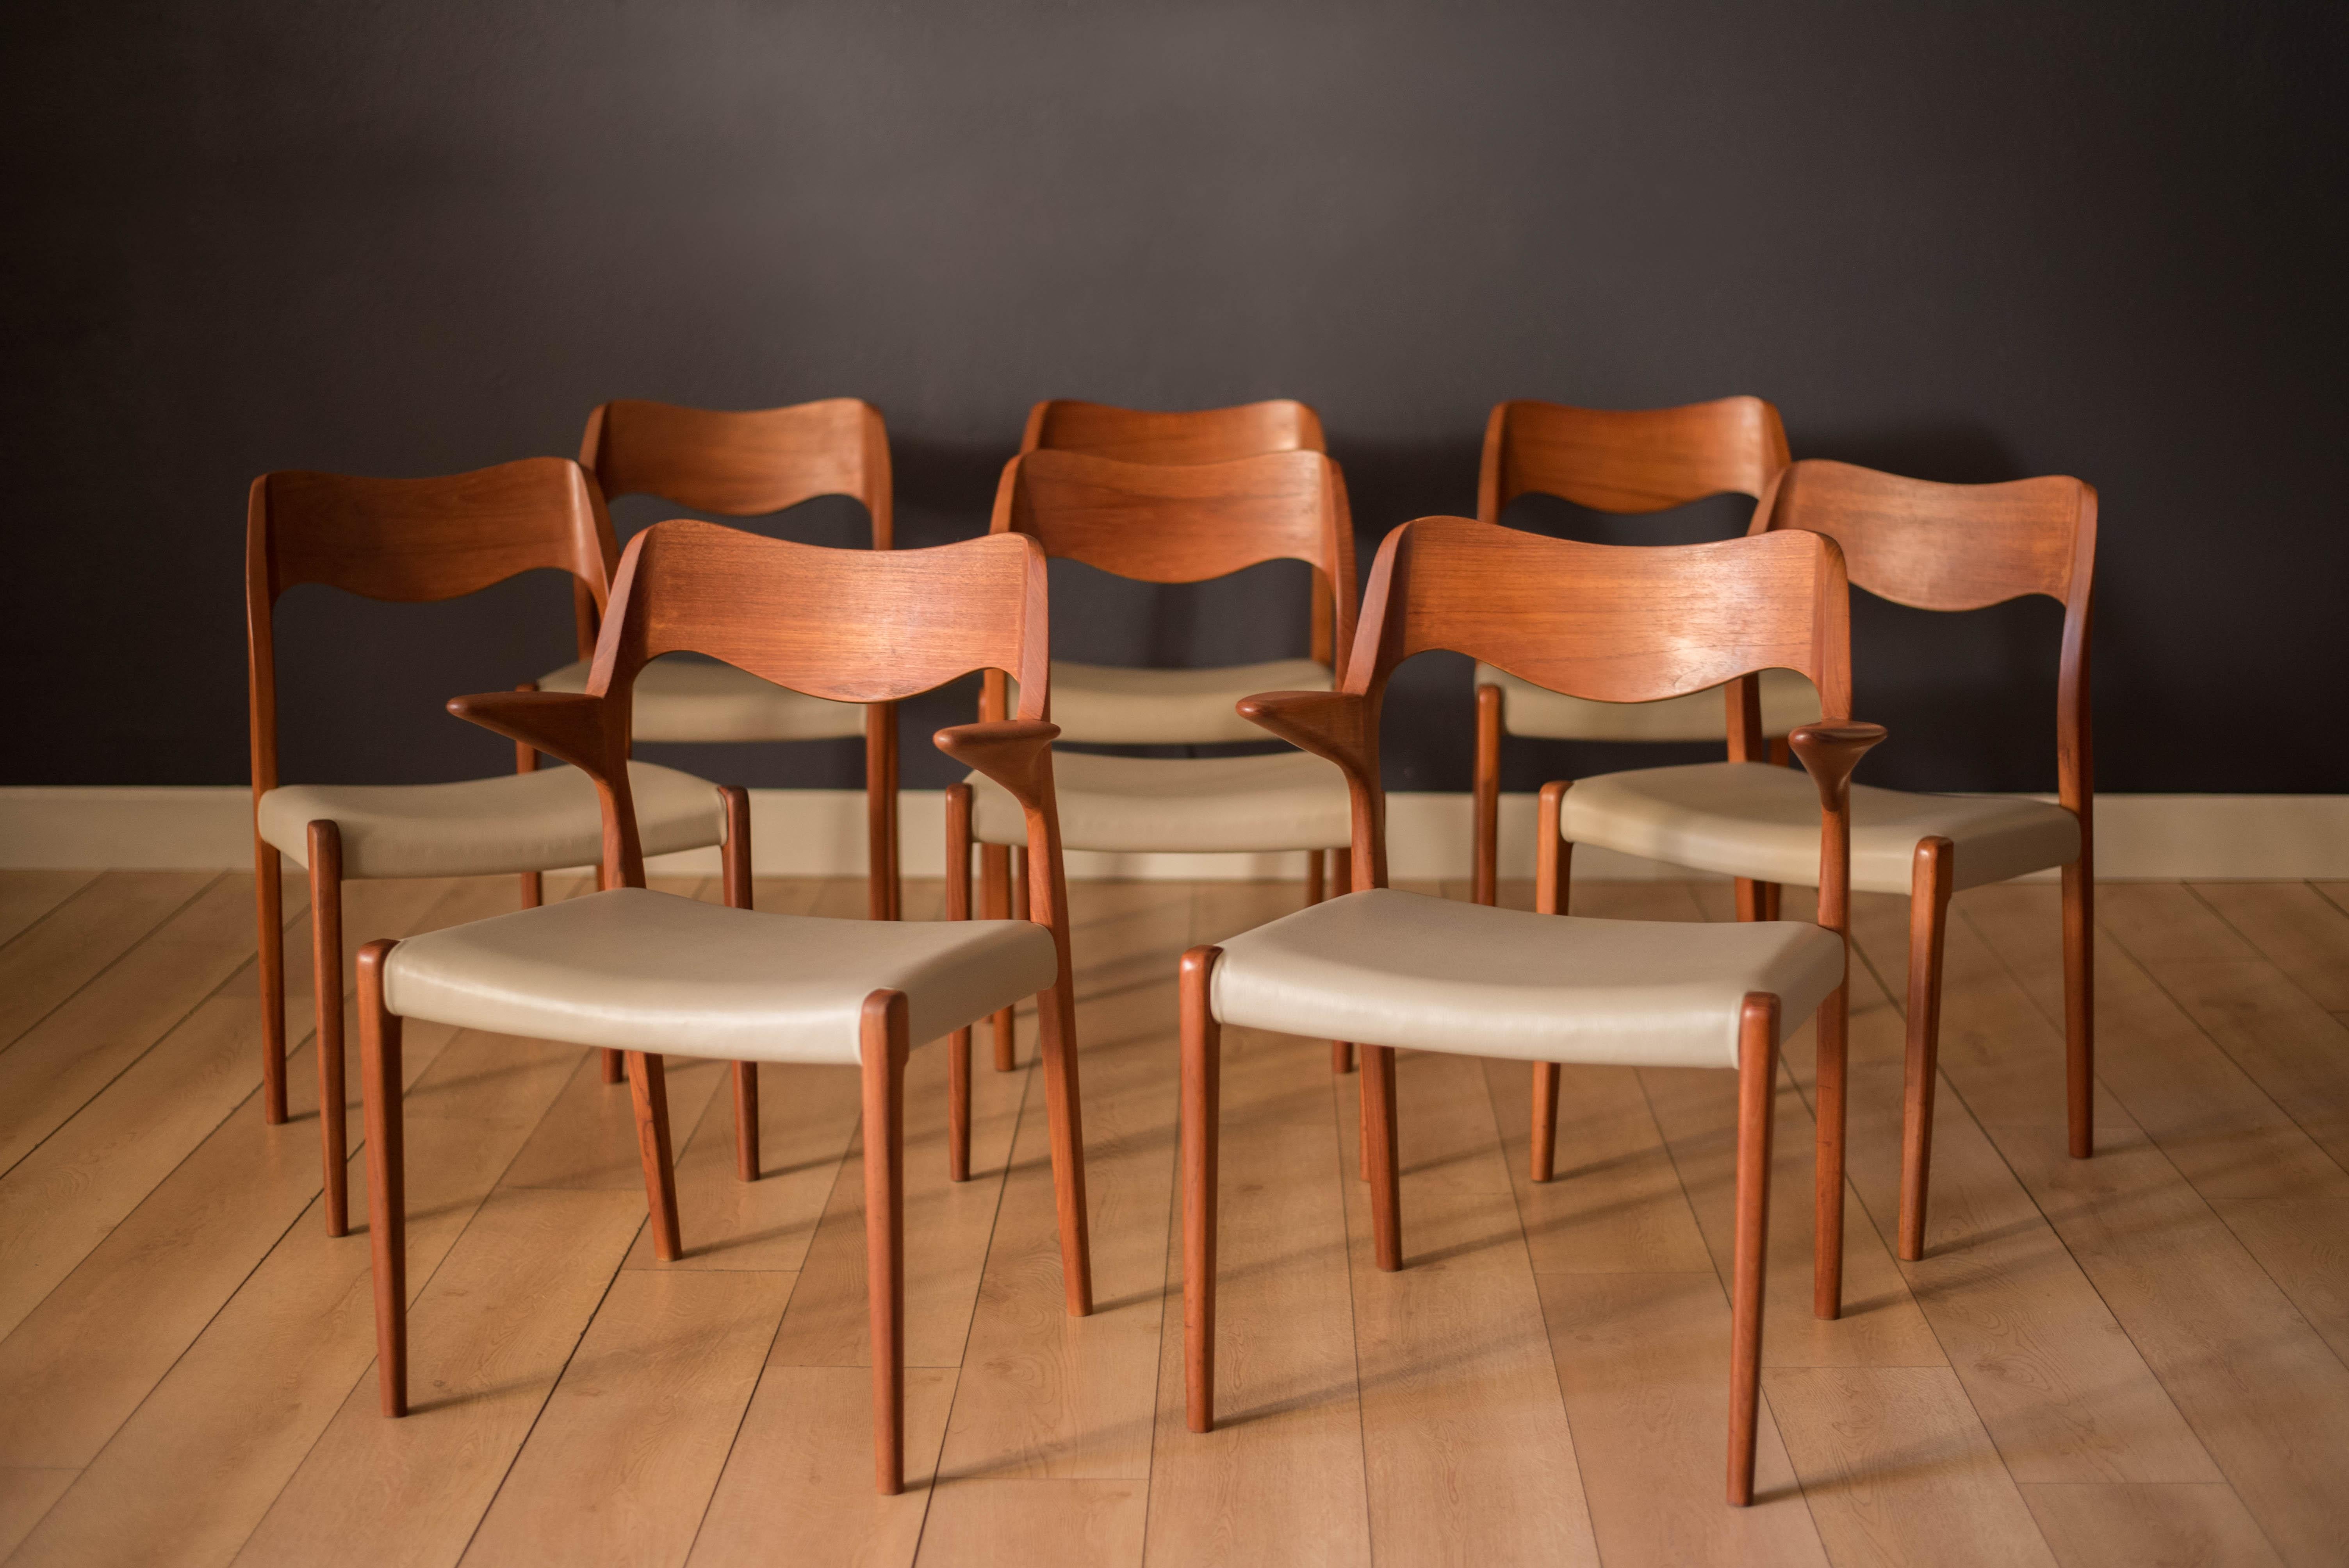 Midcentury set of eight Danish dining chairs by Niels Møller for J.L. Møller Møbelfabrik in teak. This set includes six model 71 side chairs and two 55 armchairs. The seats have been professionally reupholstered in a nude gray leatherette. Price is